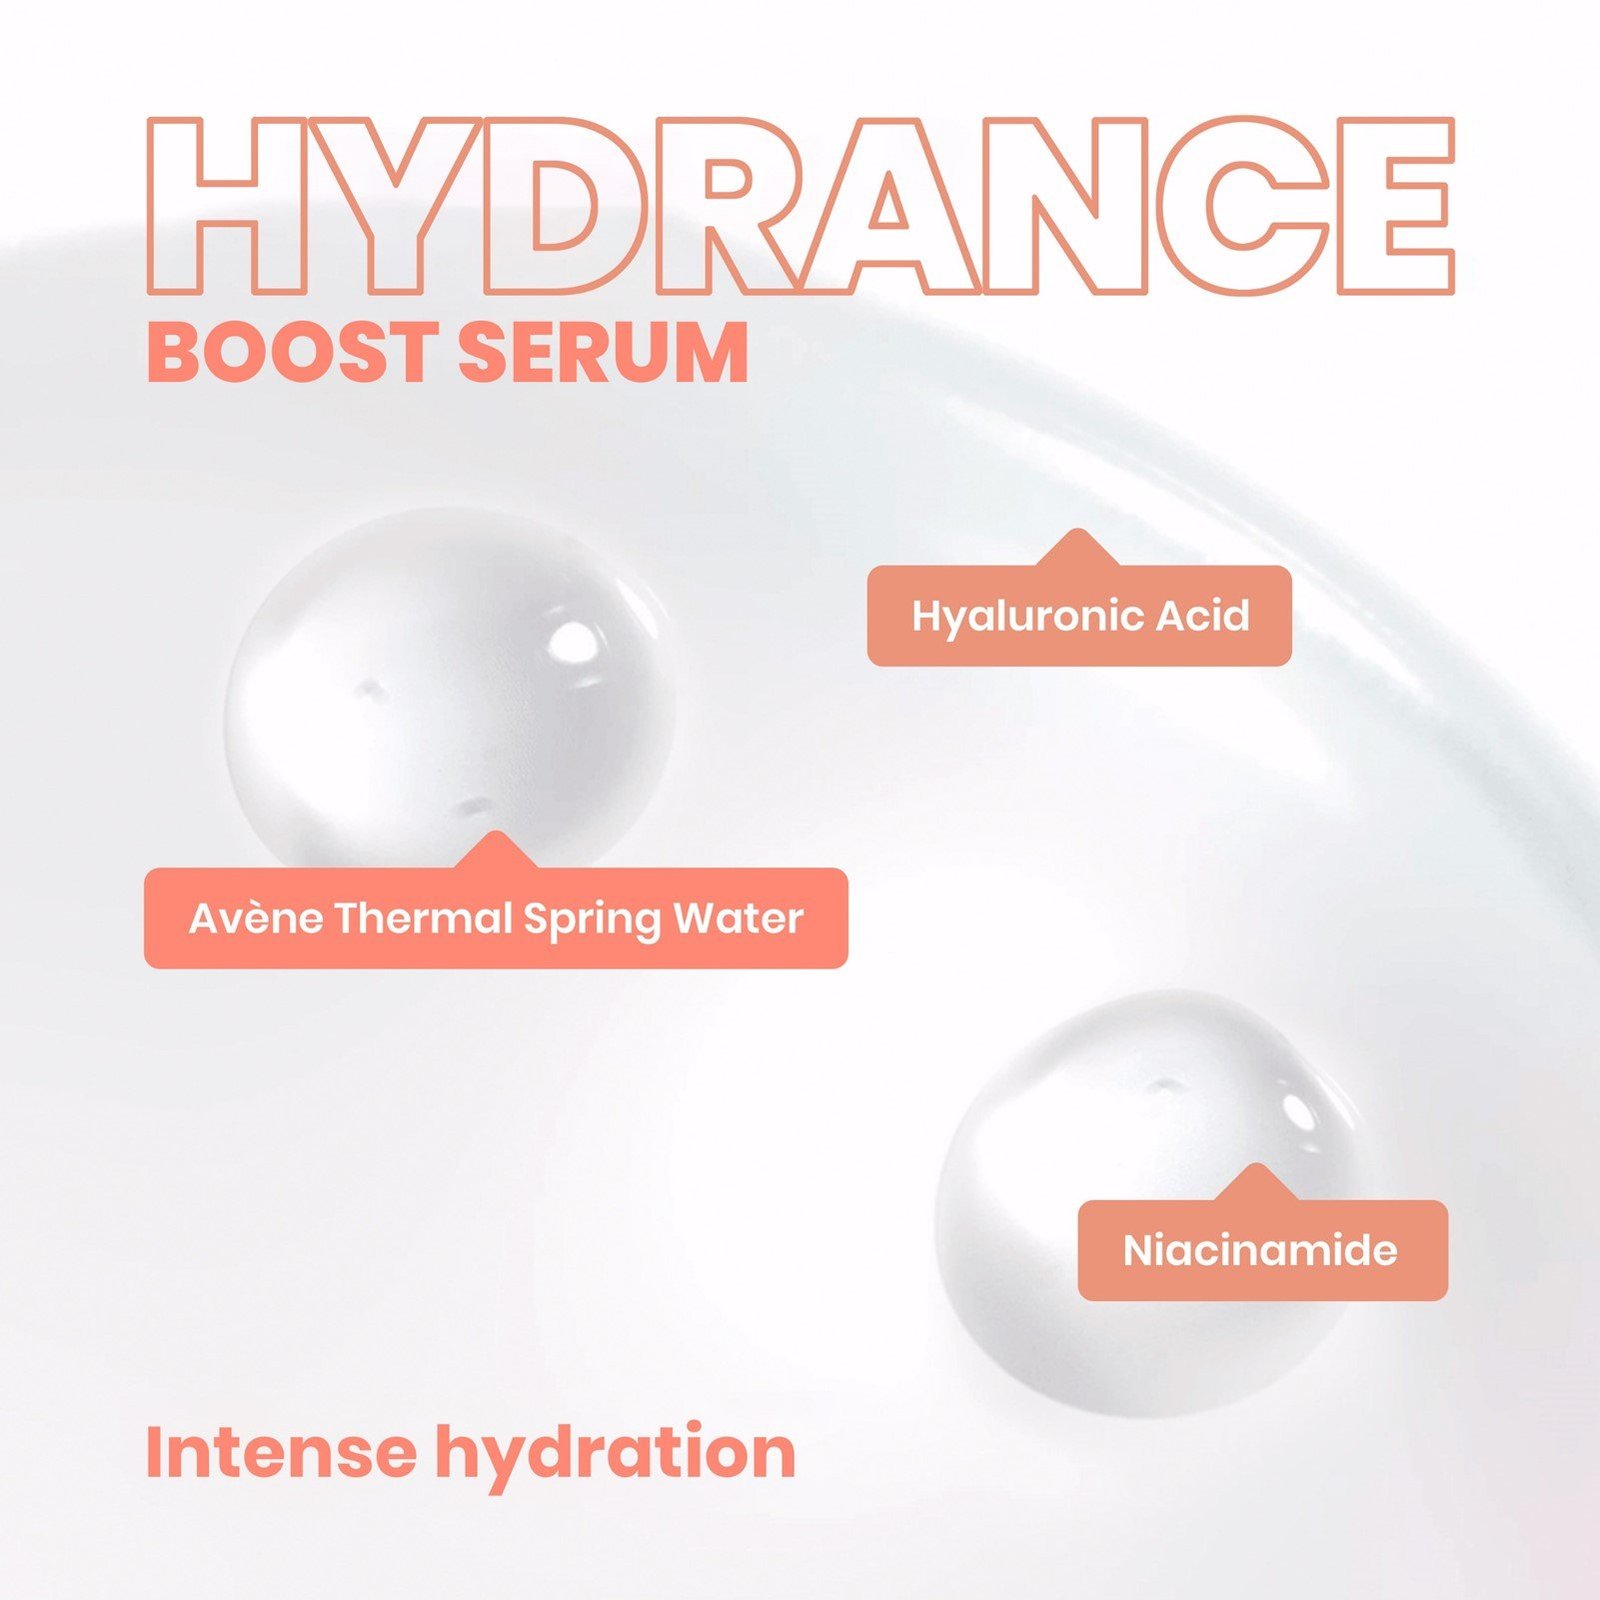 AVENE HYDRANCE BOOST CONCENTRATED HYDRATING SERUM 30ML - Alpro Pharmacy